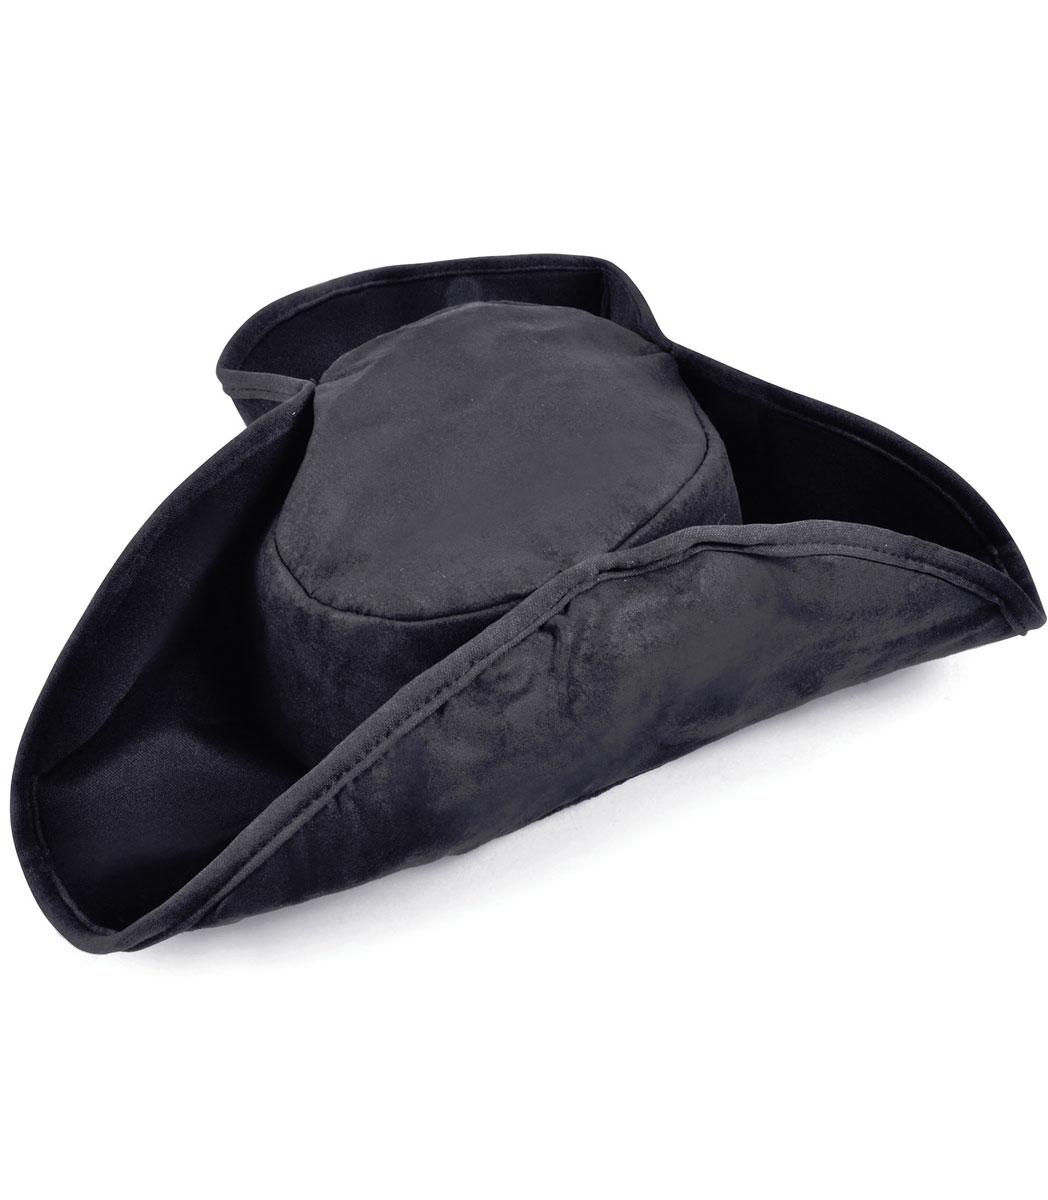 Distressed Suede Caribbean Pirate Hat in Black BH358 available here at Karnival Costumes online party shop